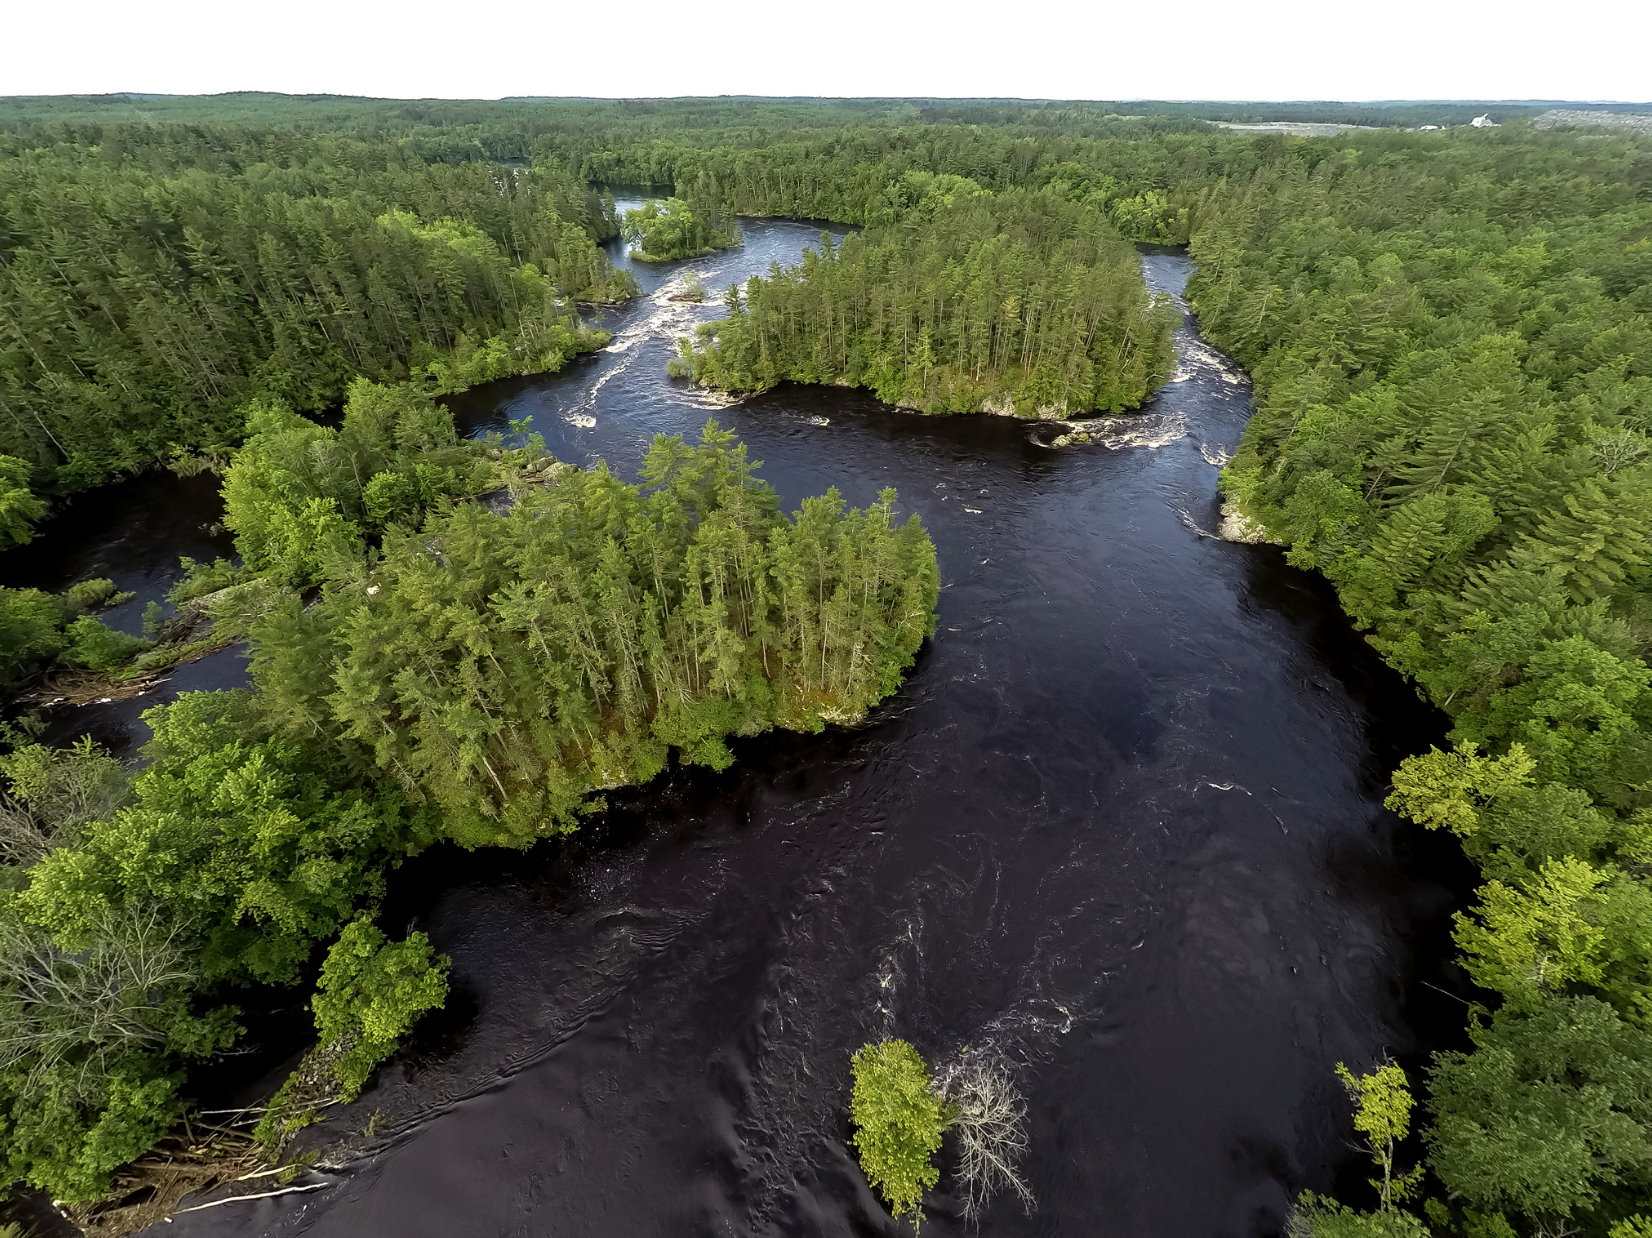 The waters of the Menominee River flow through forested areas